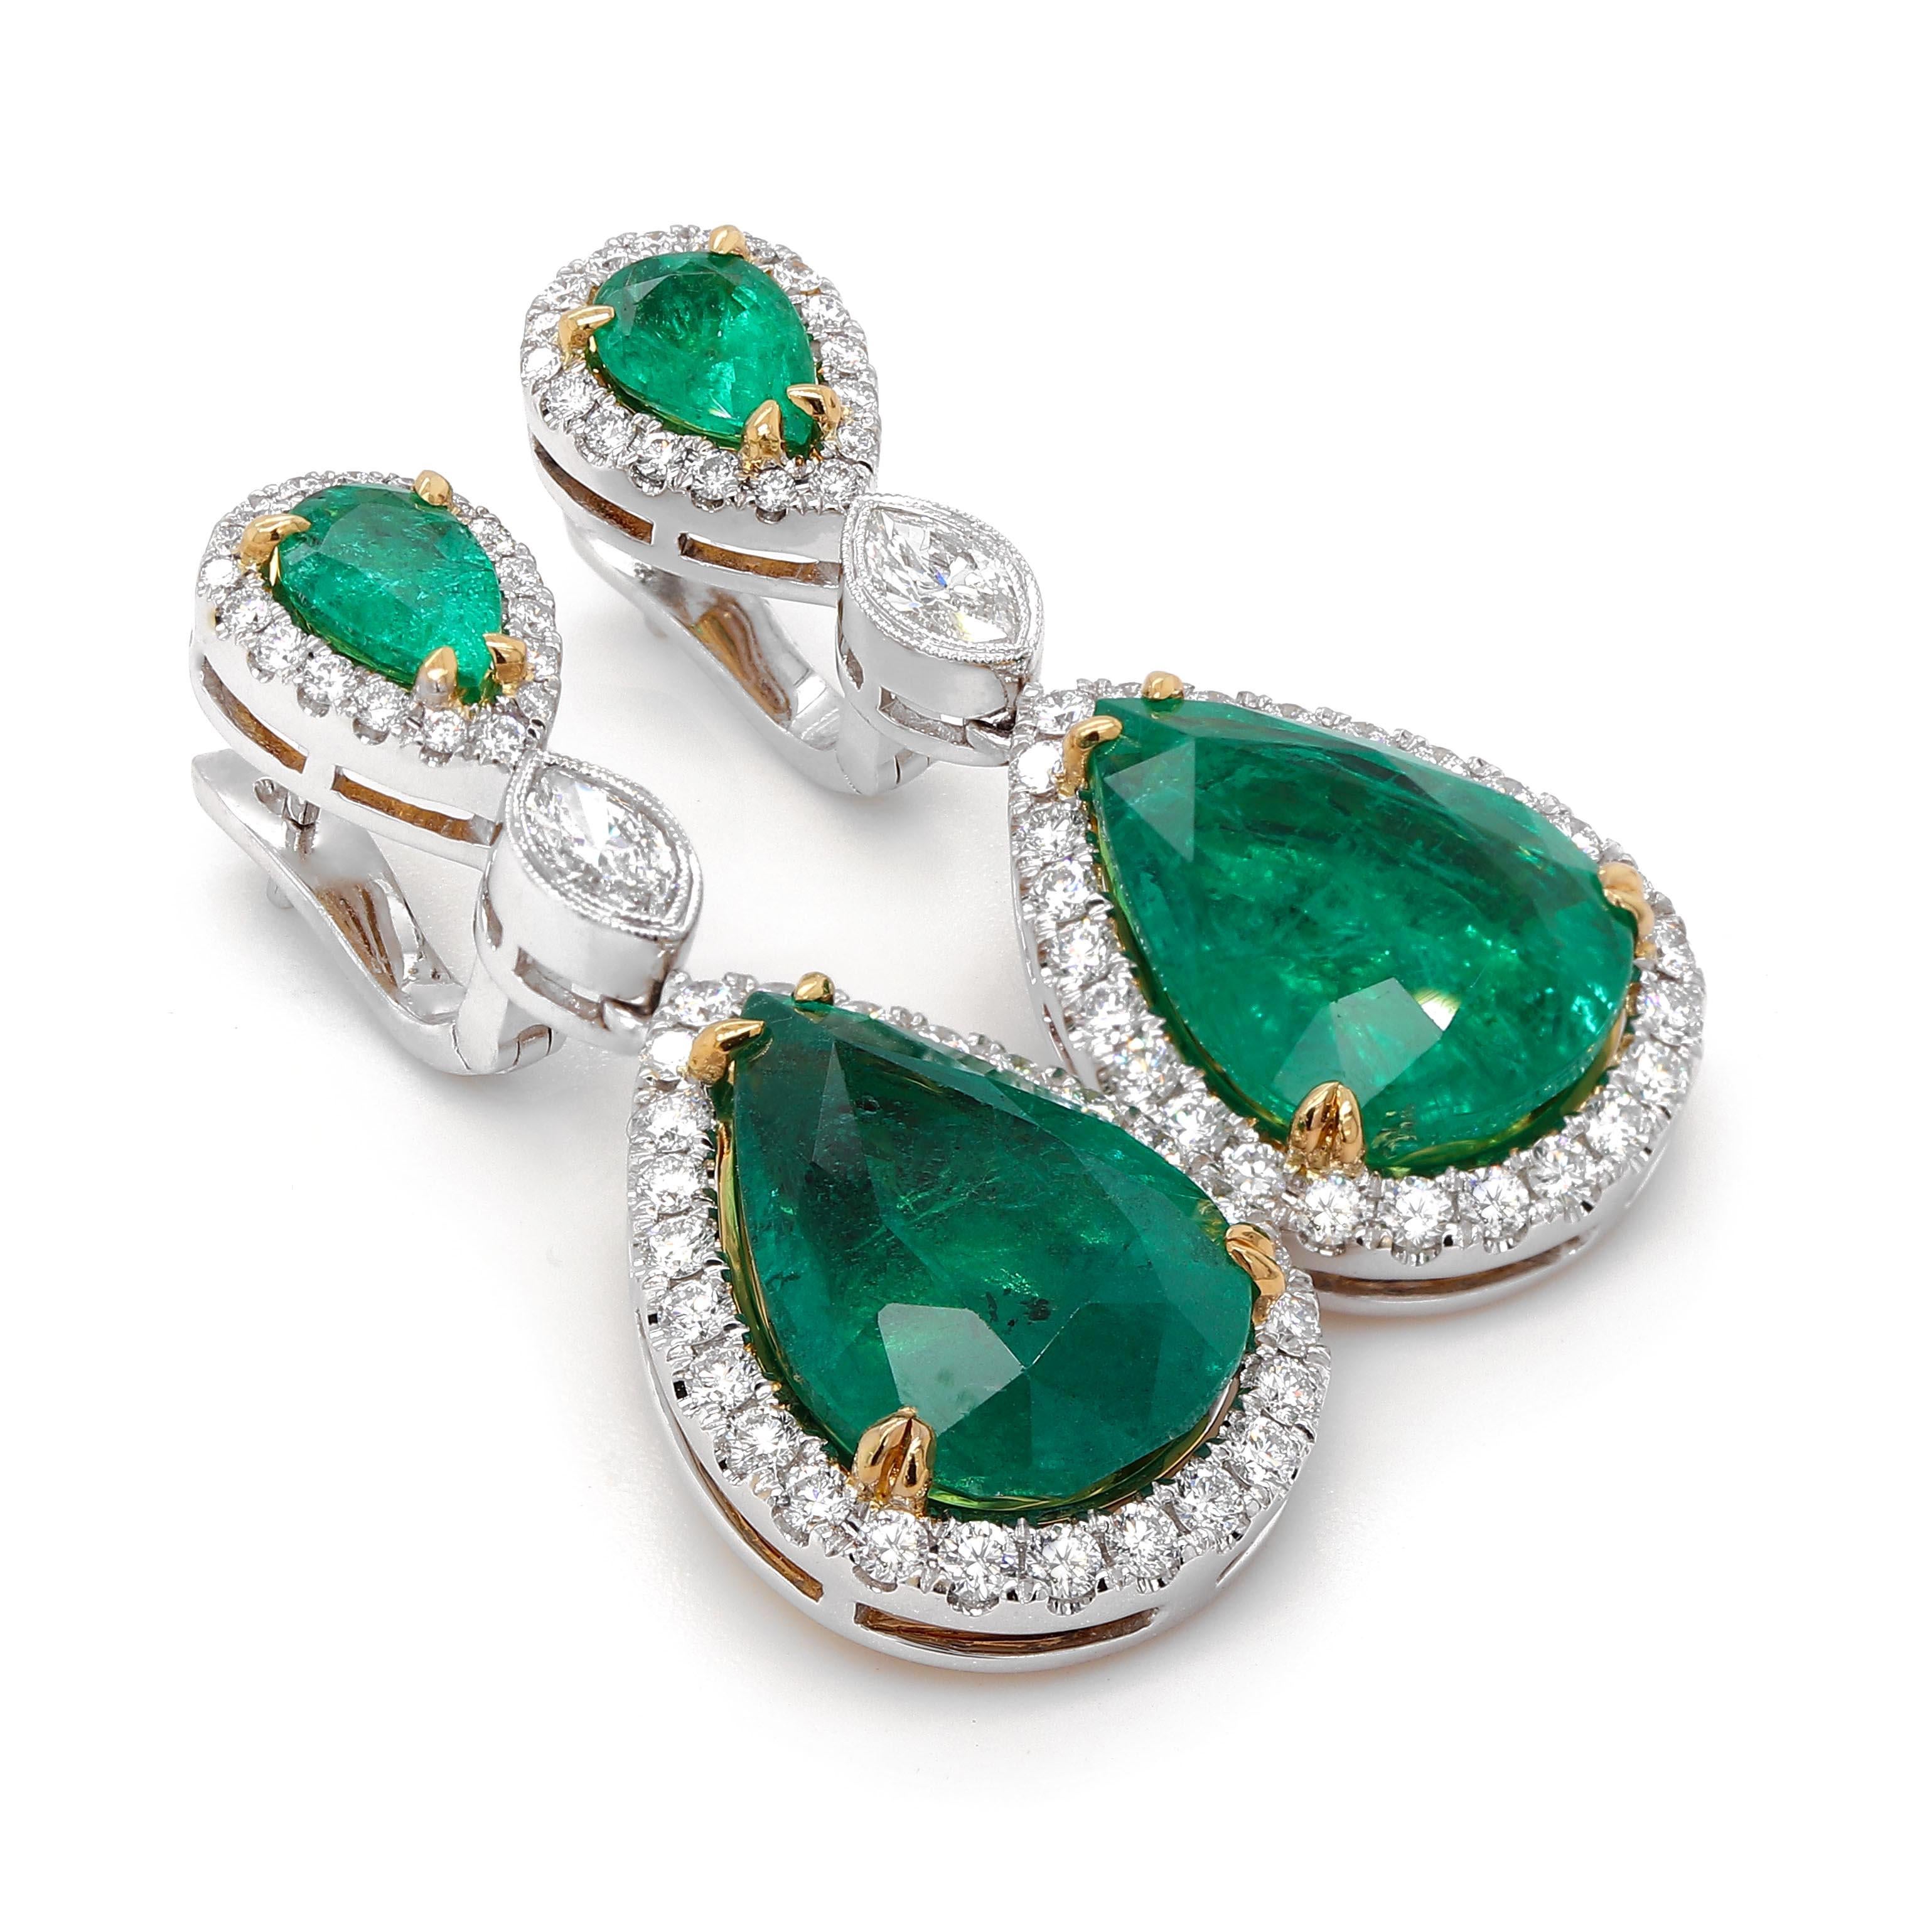 Earrings containing 2 pear shape Emeralds of about 11.91 carats and 2 pear shape Emeralds of about 1.31 carats. It also contains 2 marquise shape diamonds of about 0.40 carats. The emeralds are surrounded by 86 round brilliant cut diamonds of about